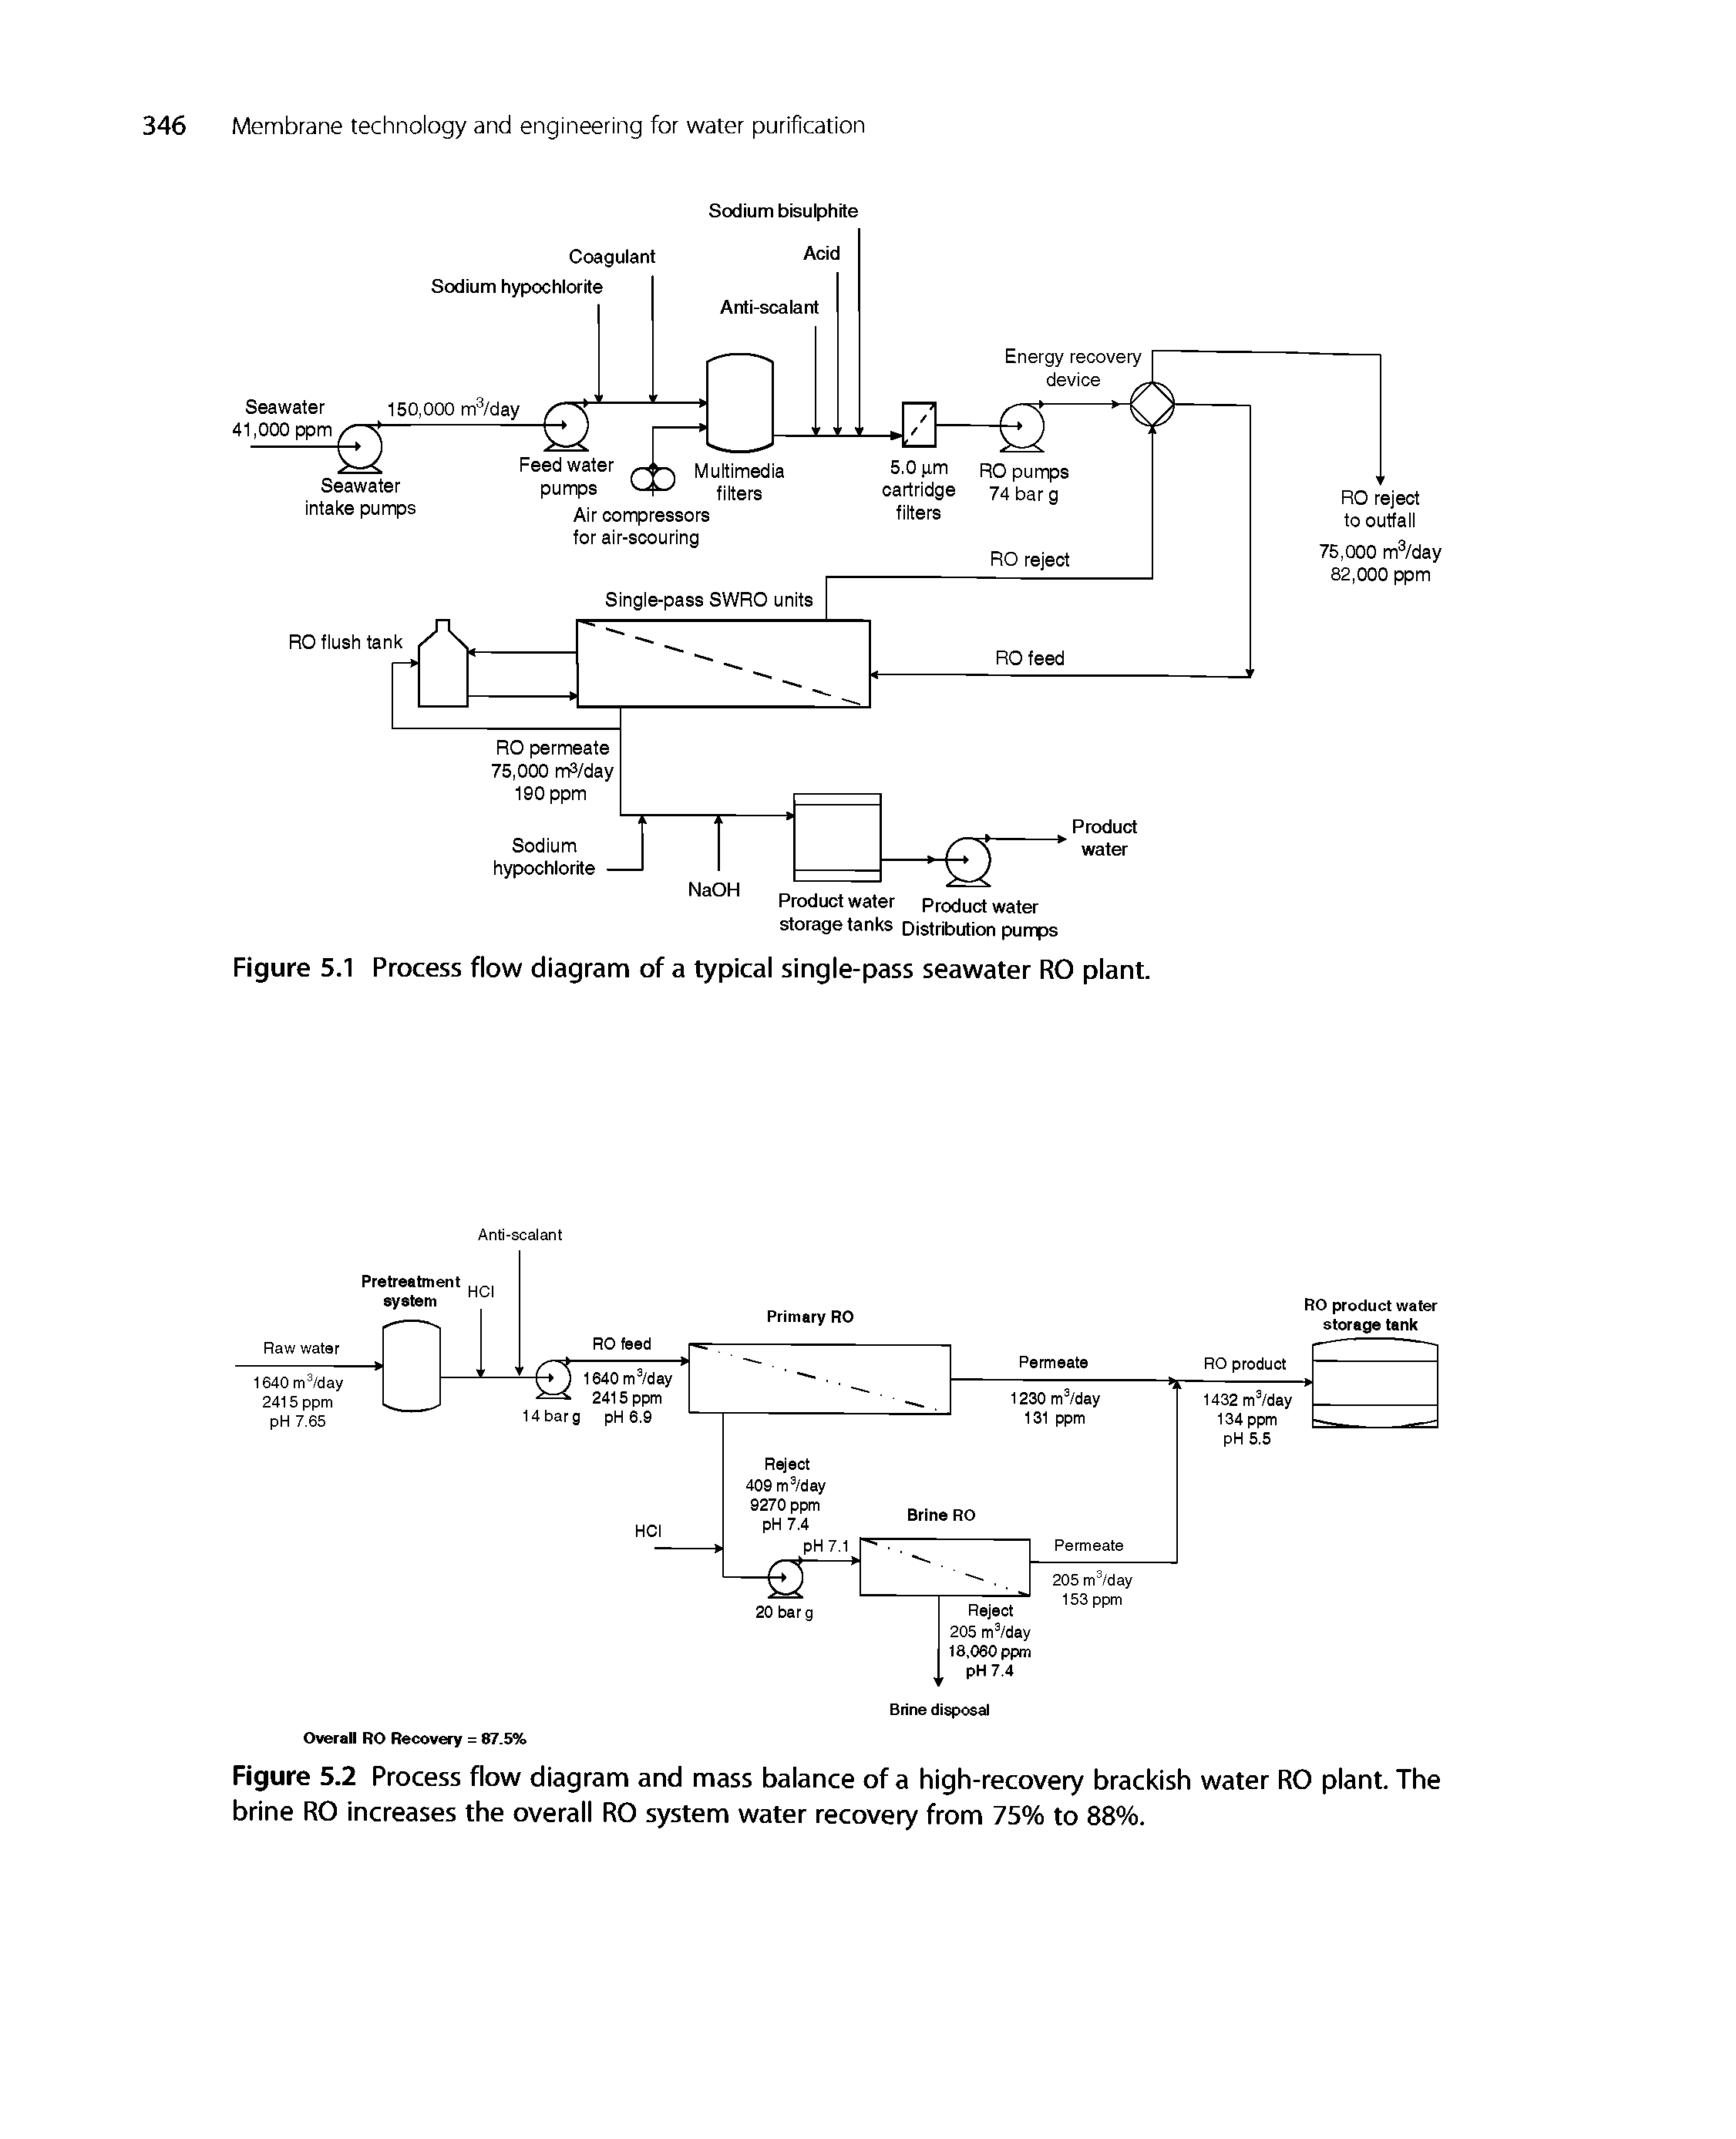 Figure 5.2 Process flow diagram and mass balance of a high-recovery brackish water RO plant. The brine RO increases the overall RO system water recovery from 75% to 88%.